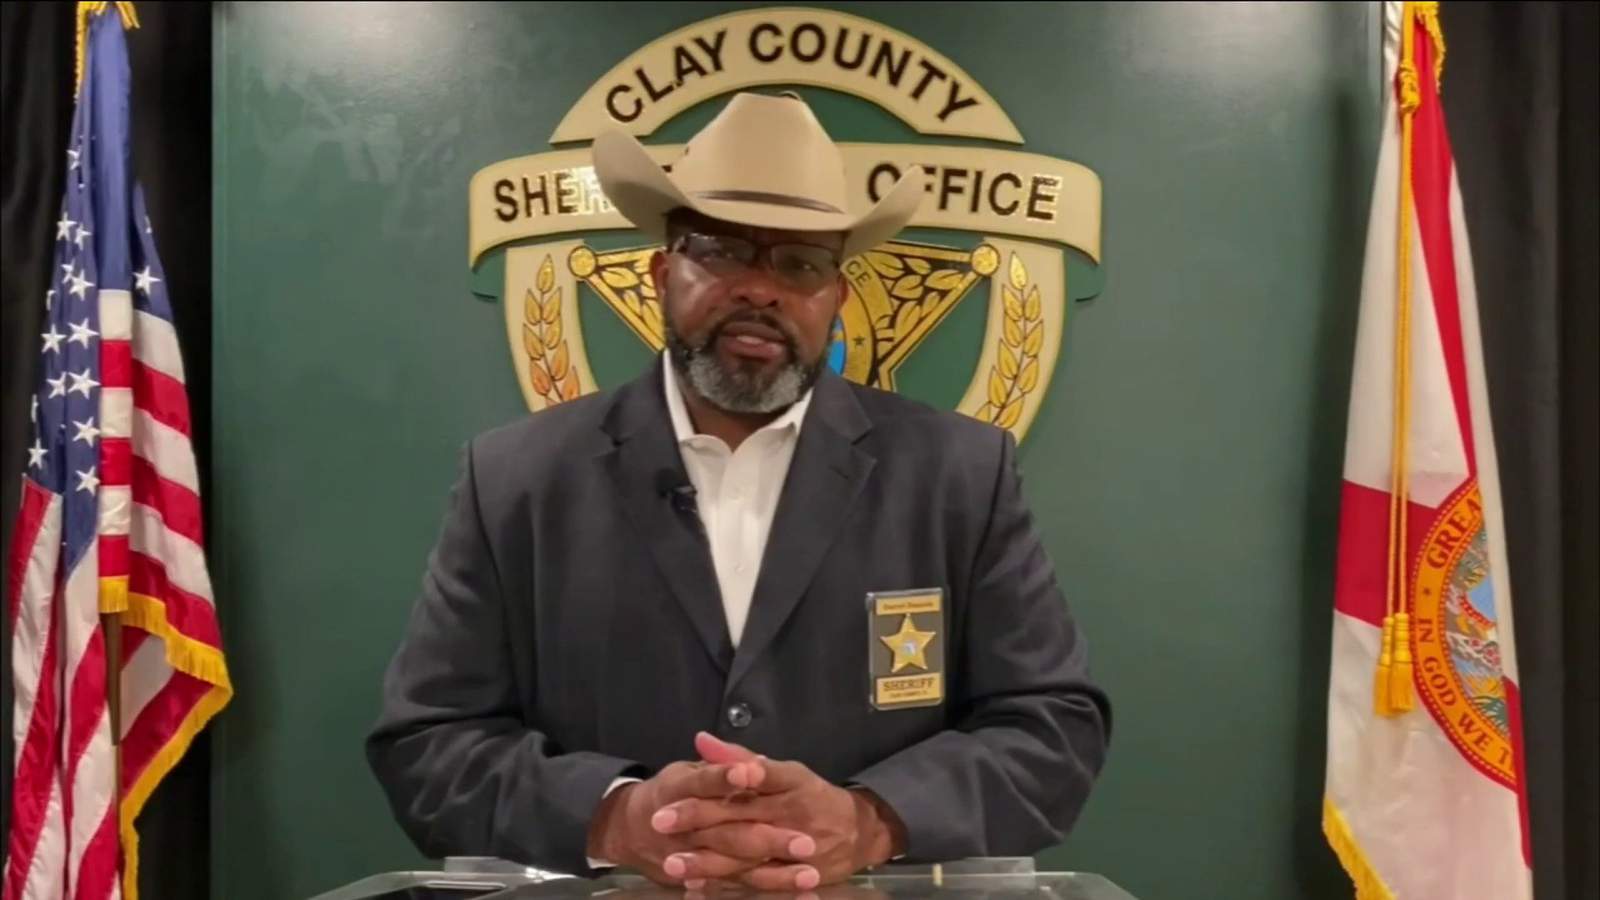 Clay County Sheriff Darryl Daniels turns himself in, faces 4 charges